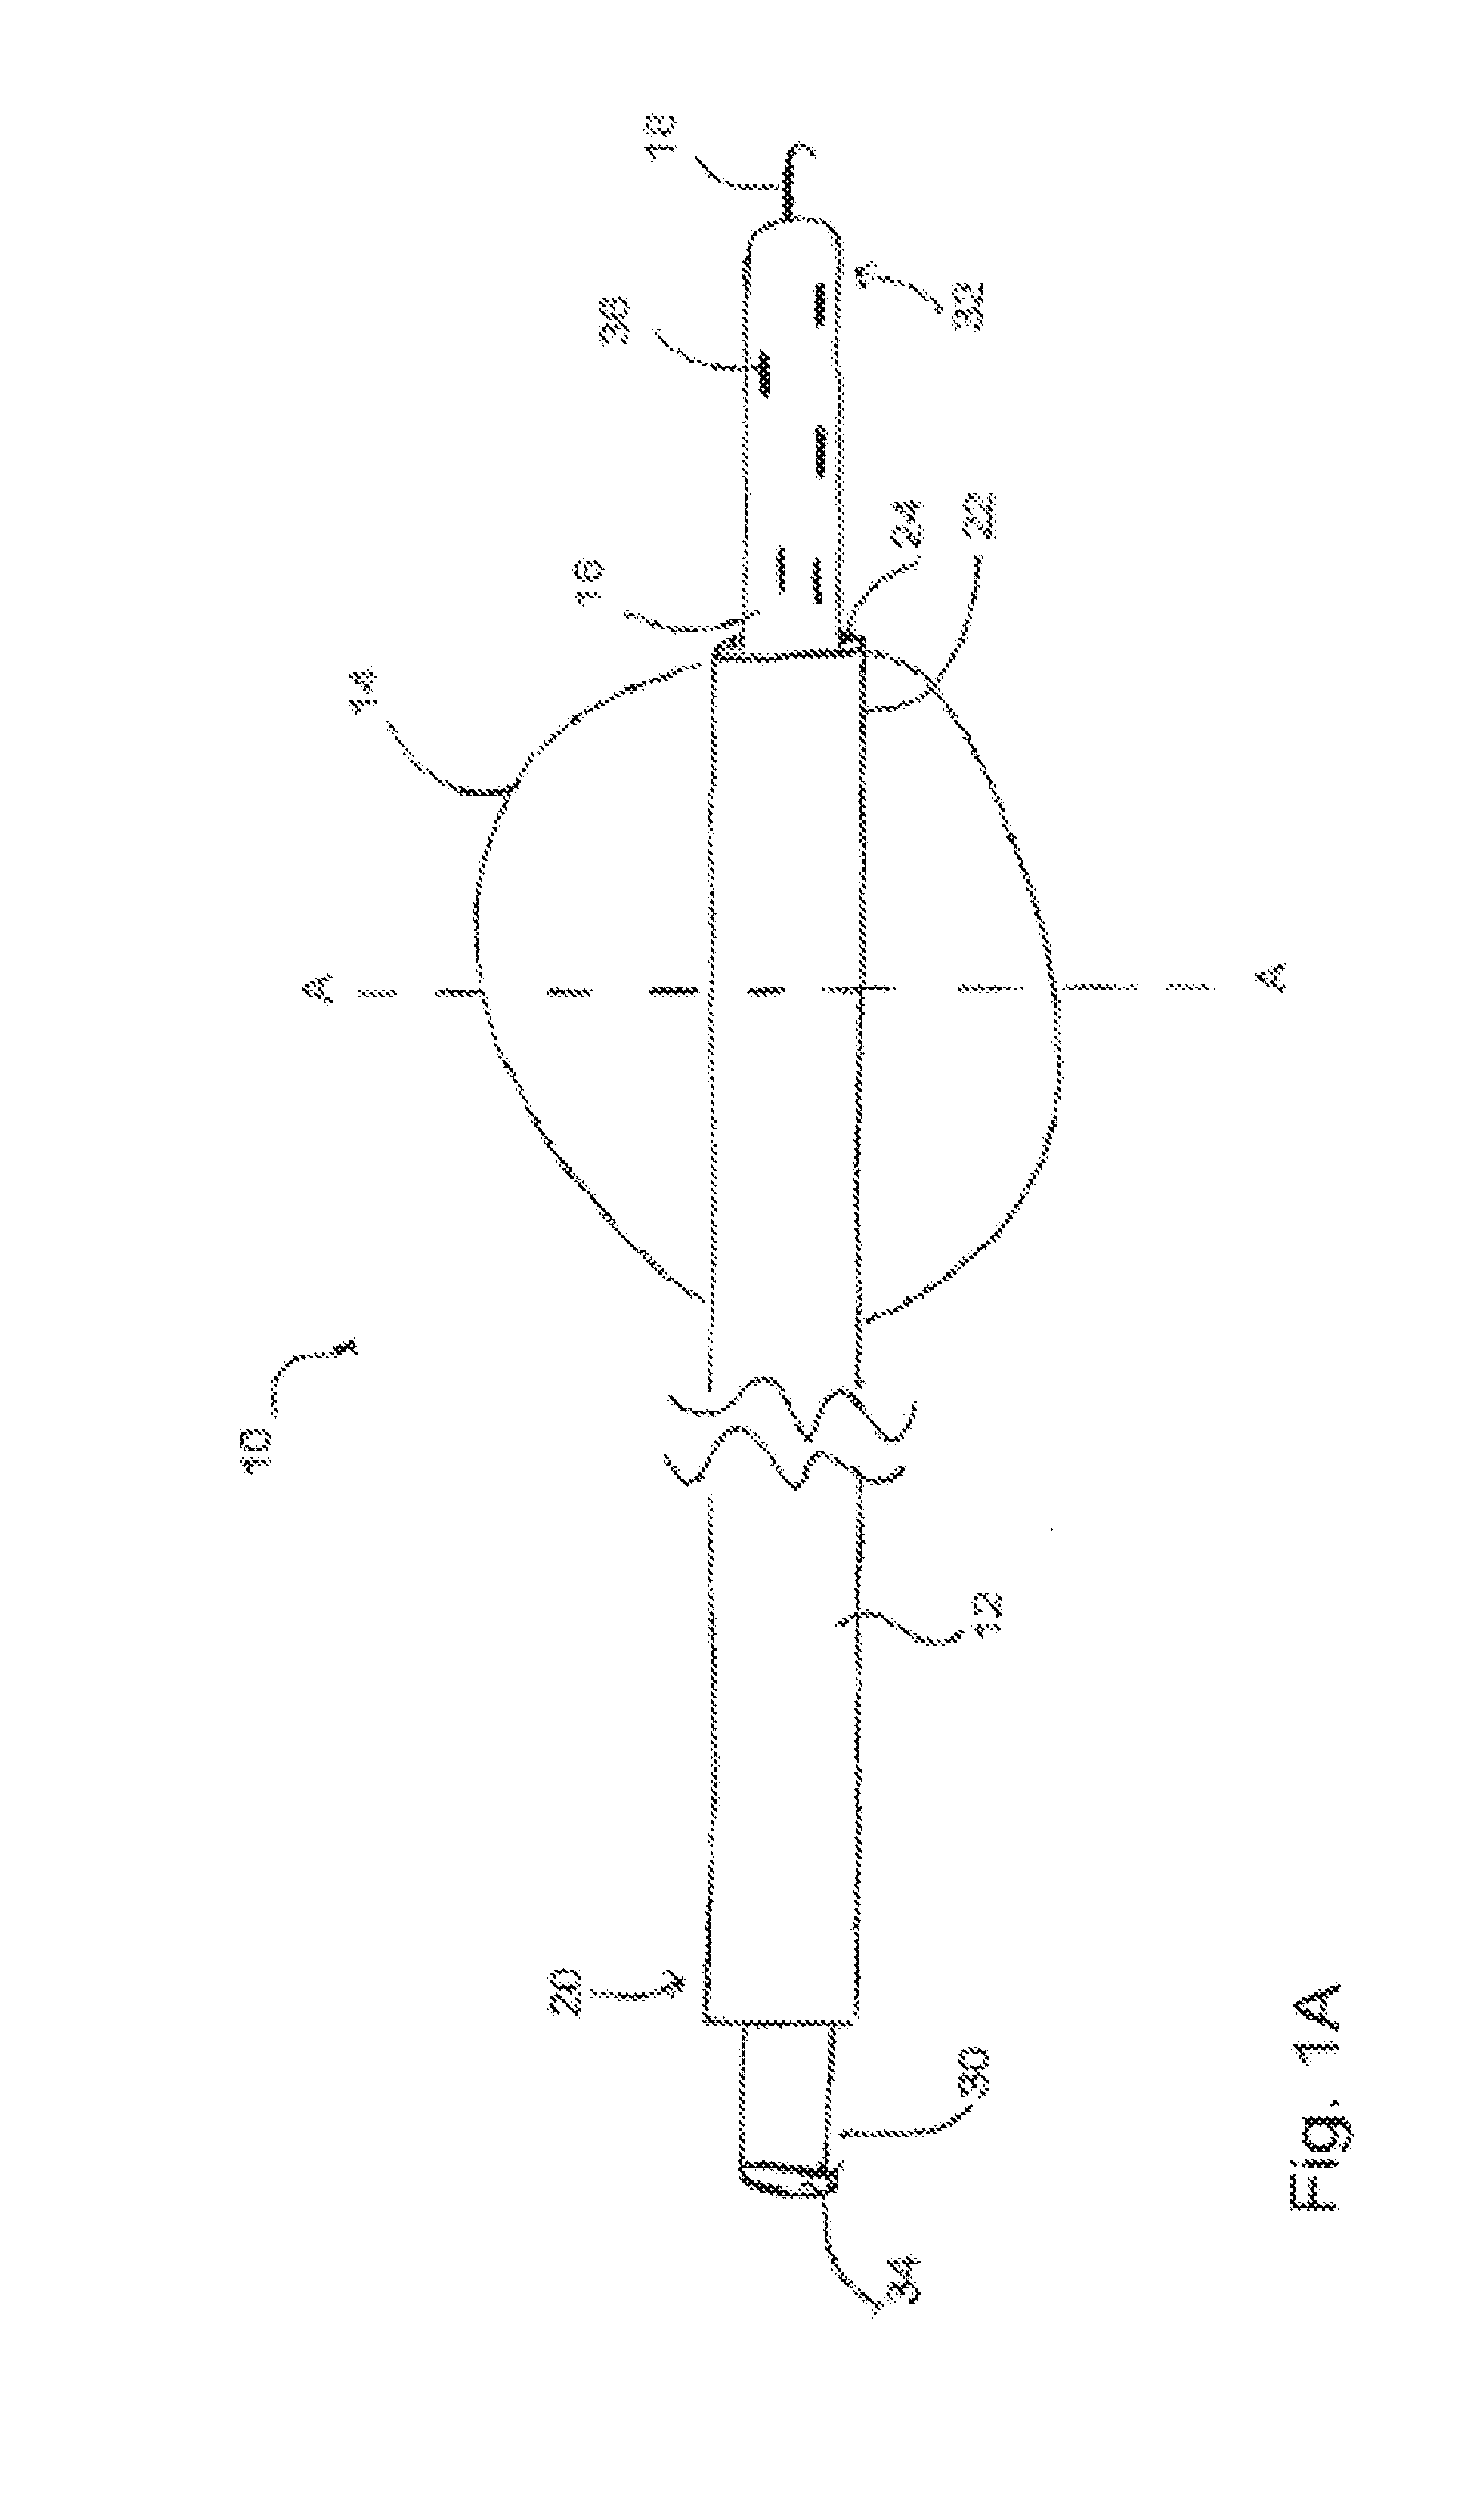 Devices, systems, and methods for atrial appendage occlusion using light cure